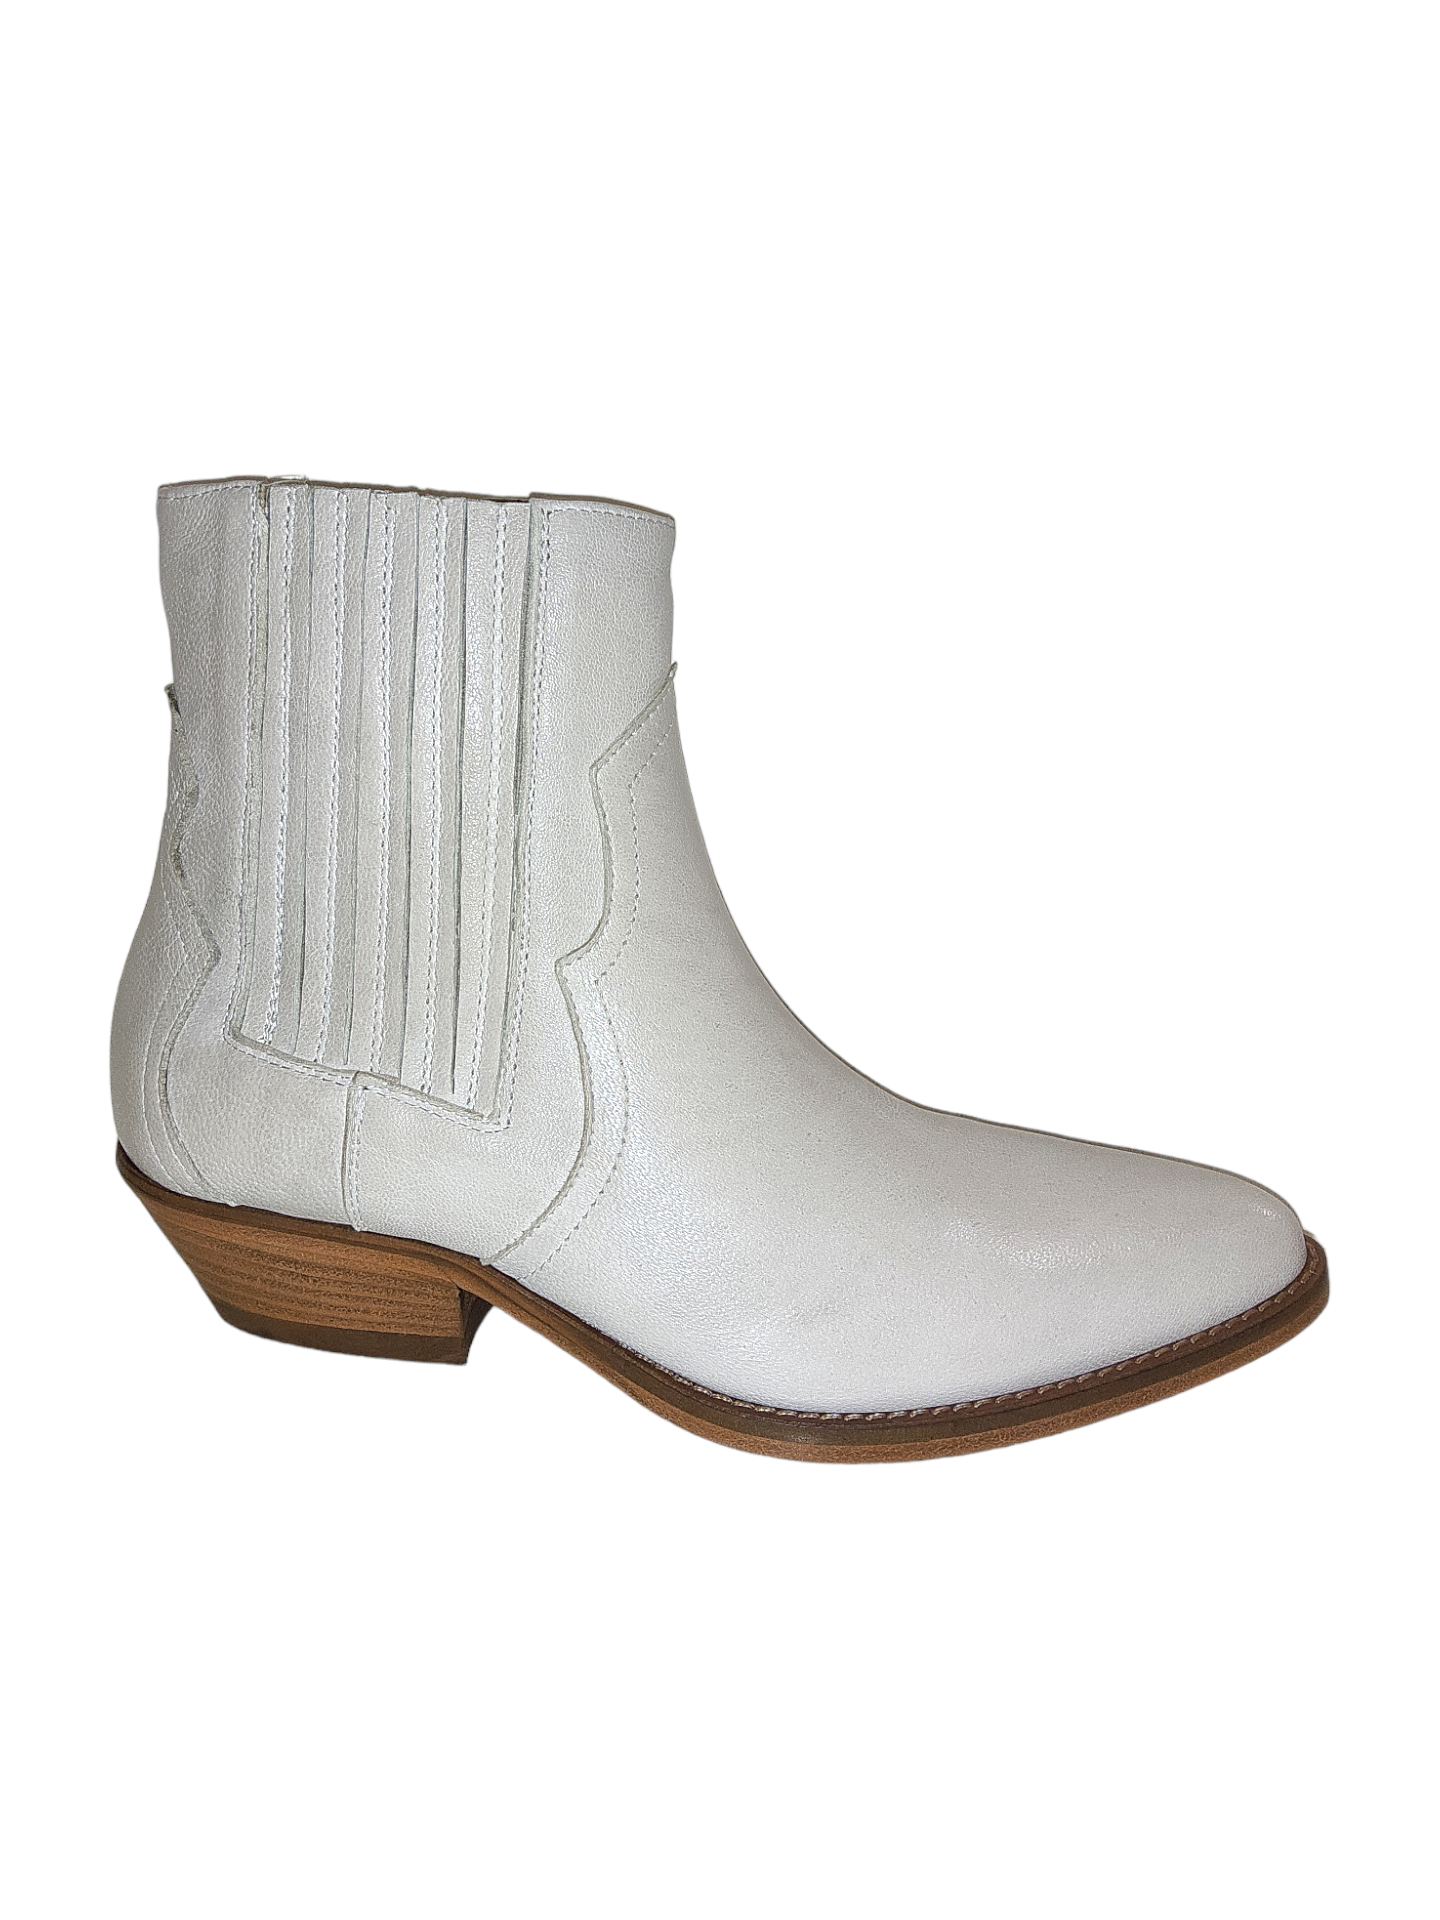 Cream leather ankle boots